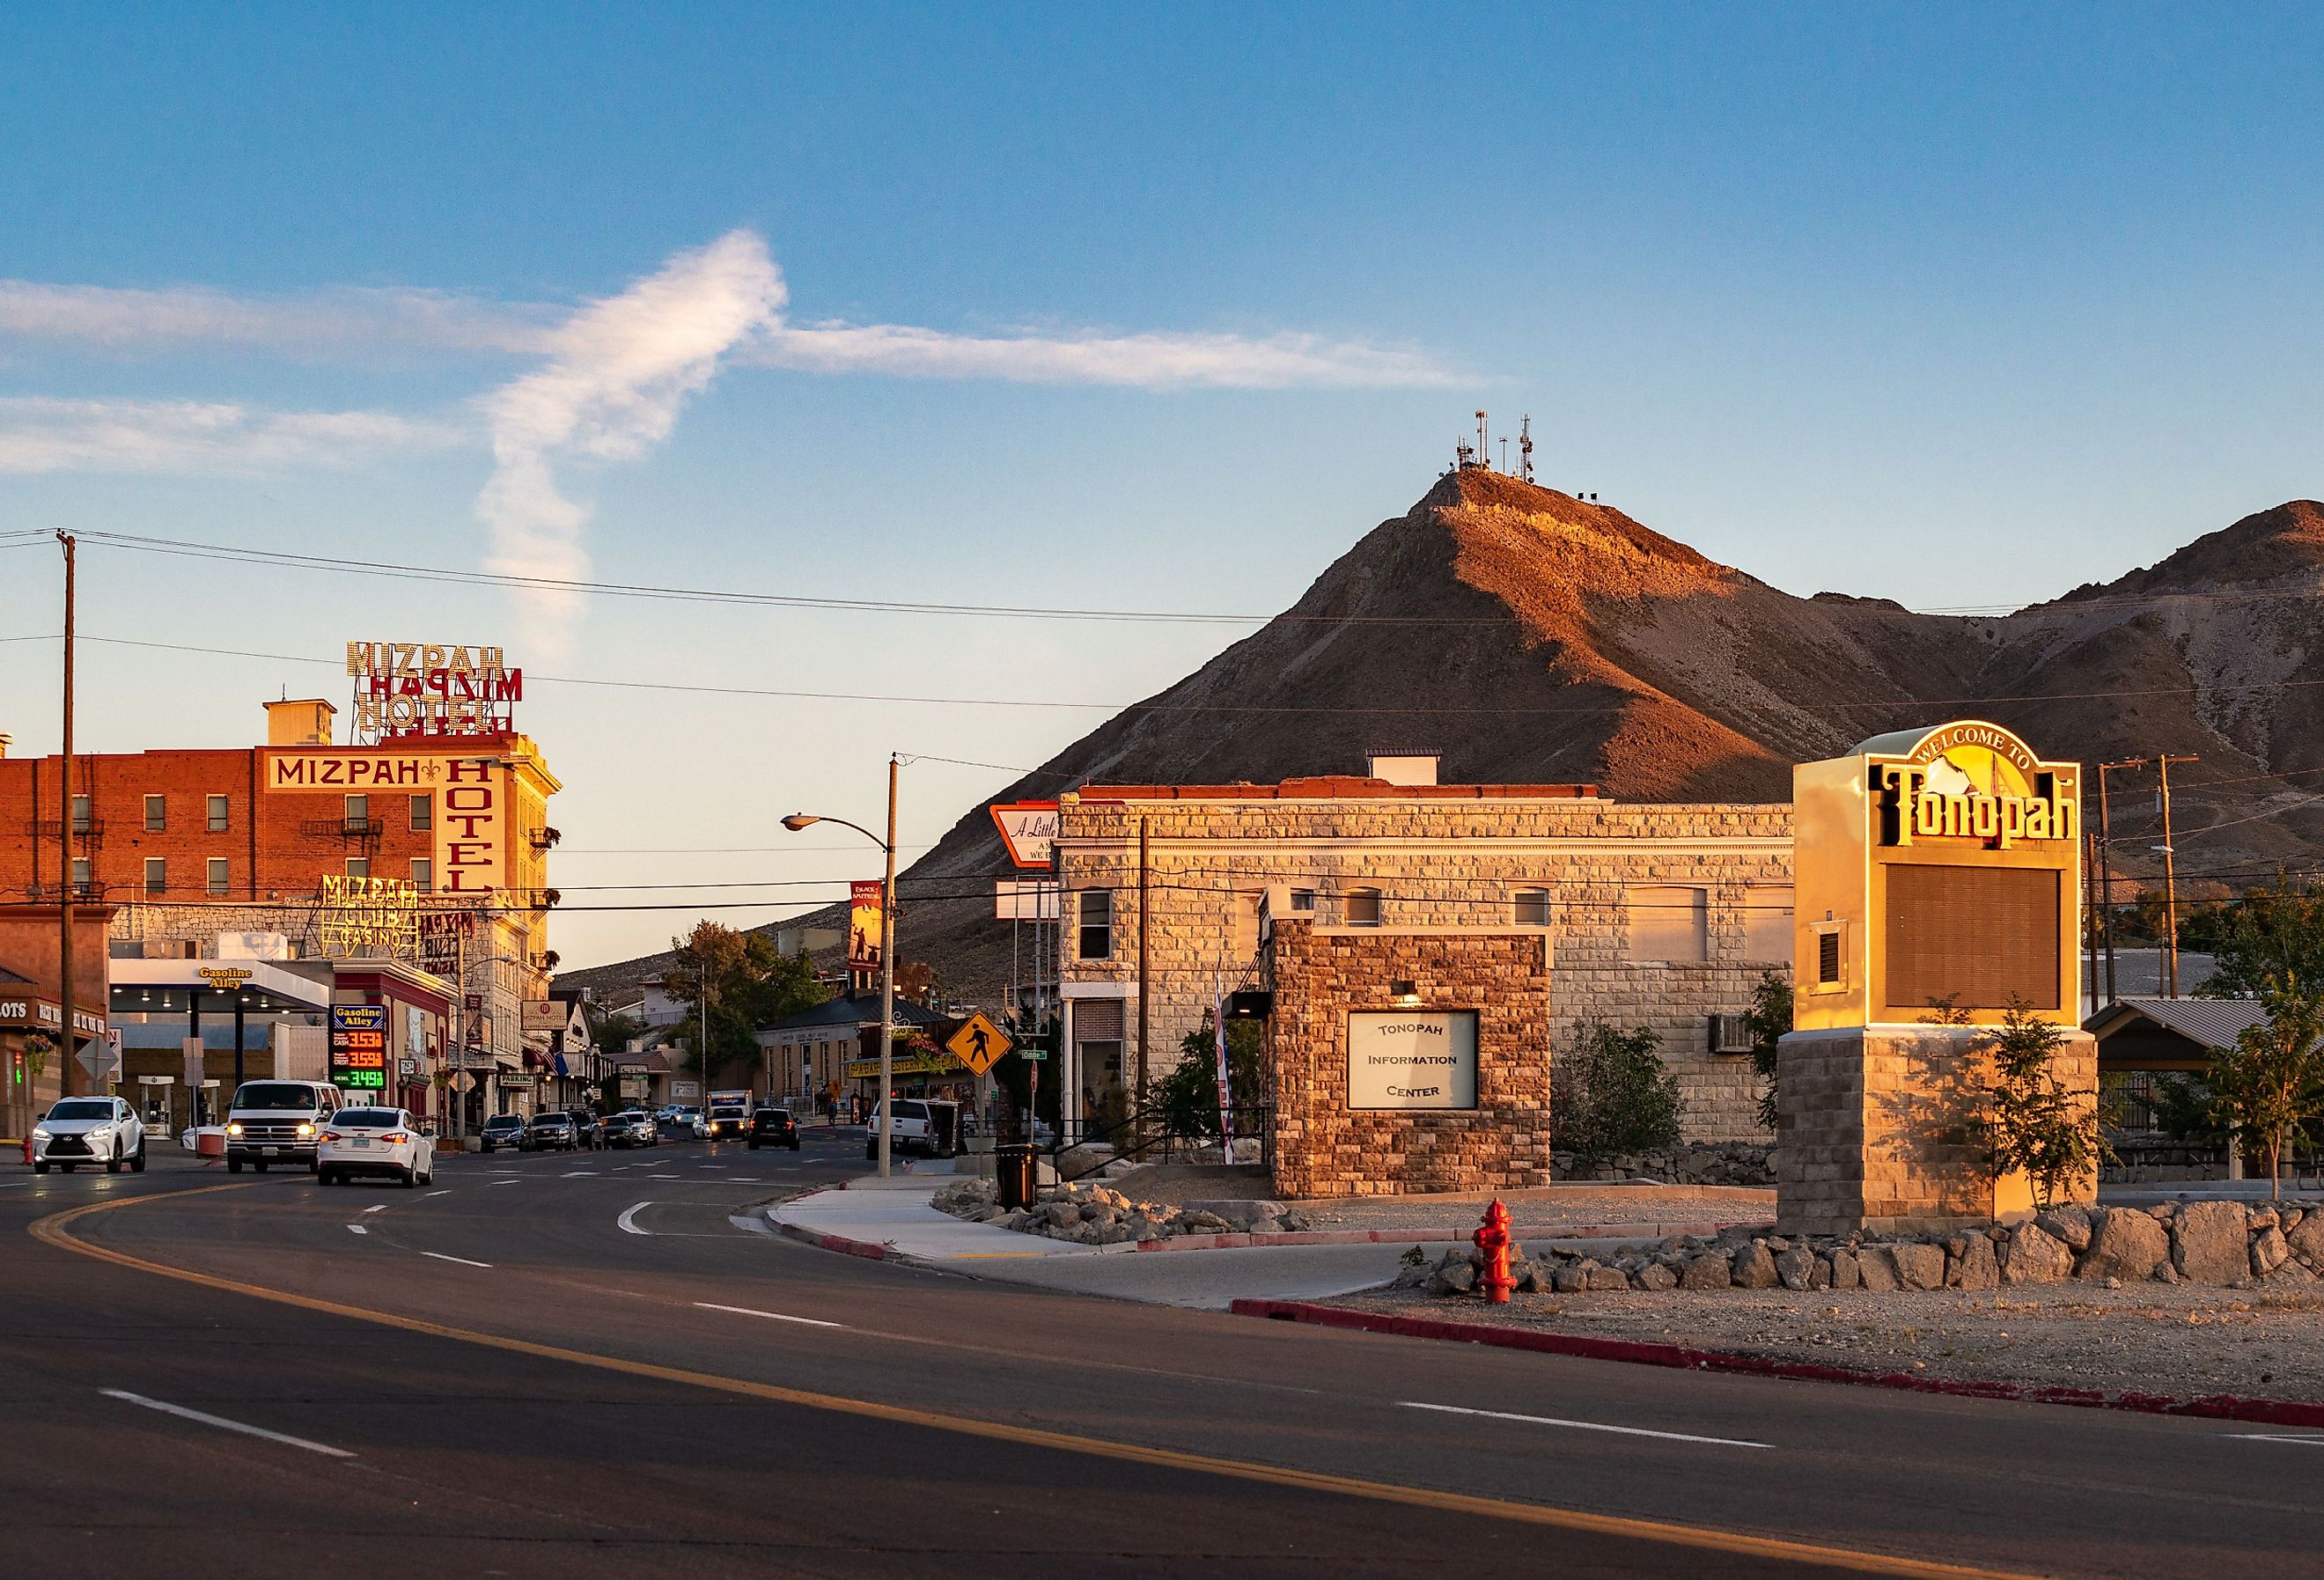 Historic downtown Mizpah Hotel and Welcome to Tonopah Sign, Nevada. Image credit Dominic Gentilcore PhD via Shutterstock